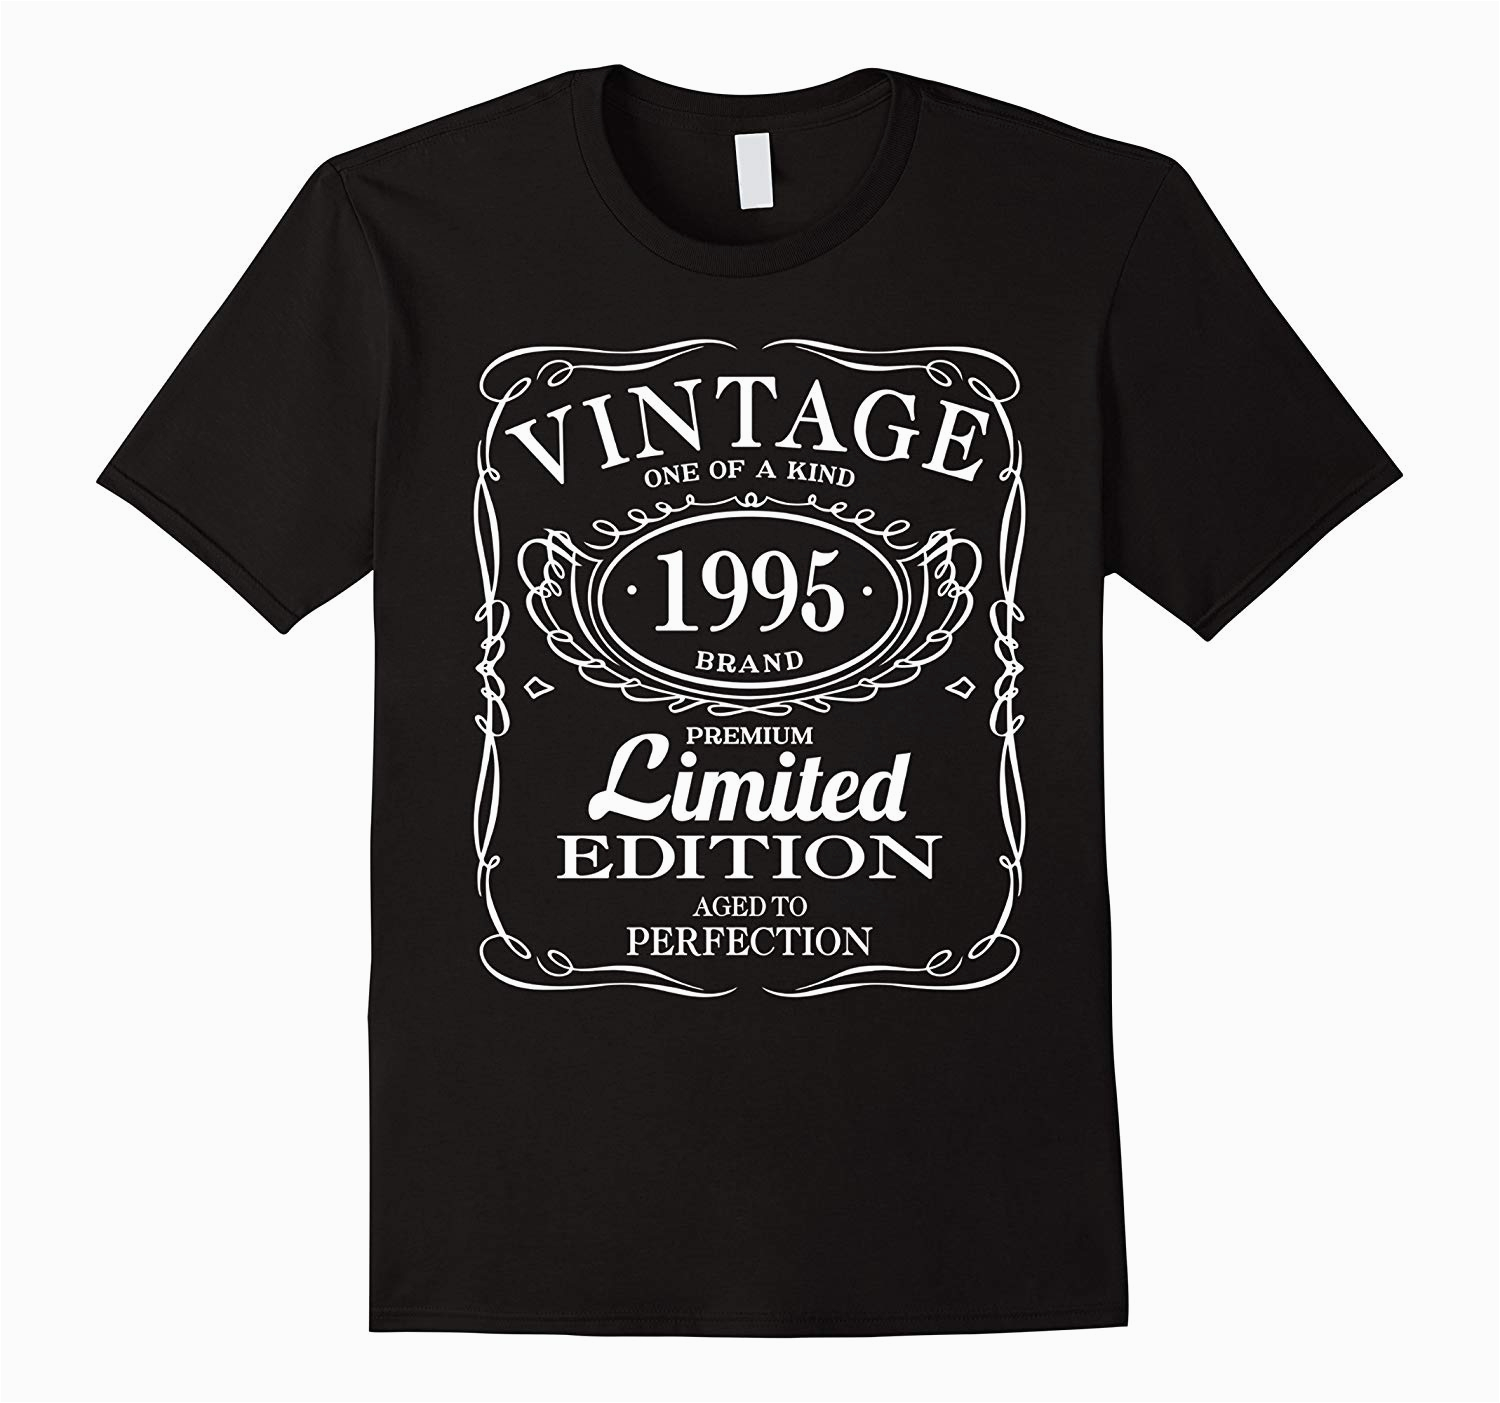 21st birthday gift vintage 1995 limited edition t shirt